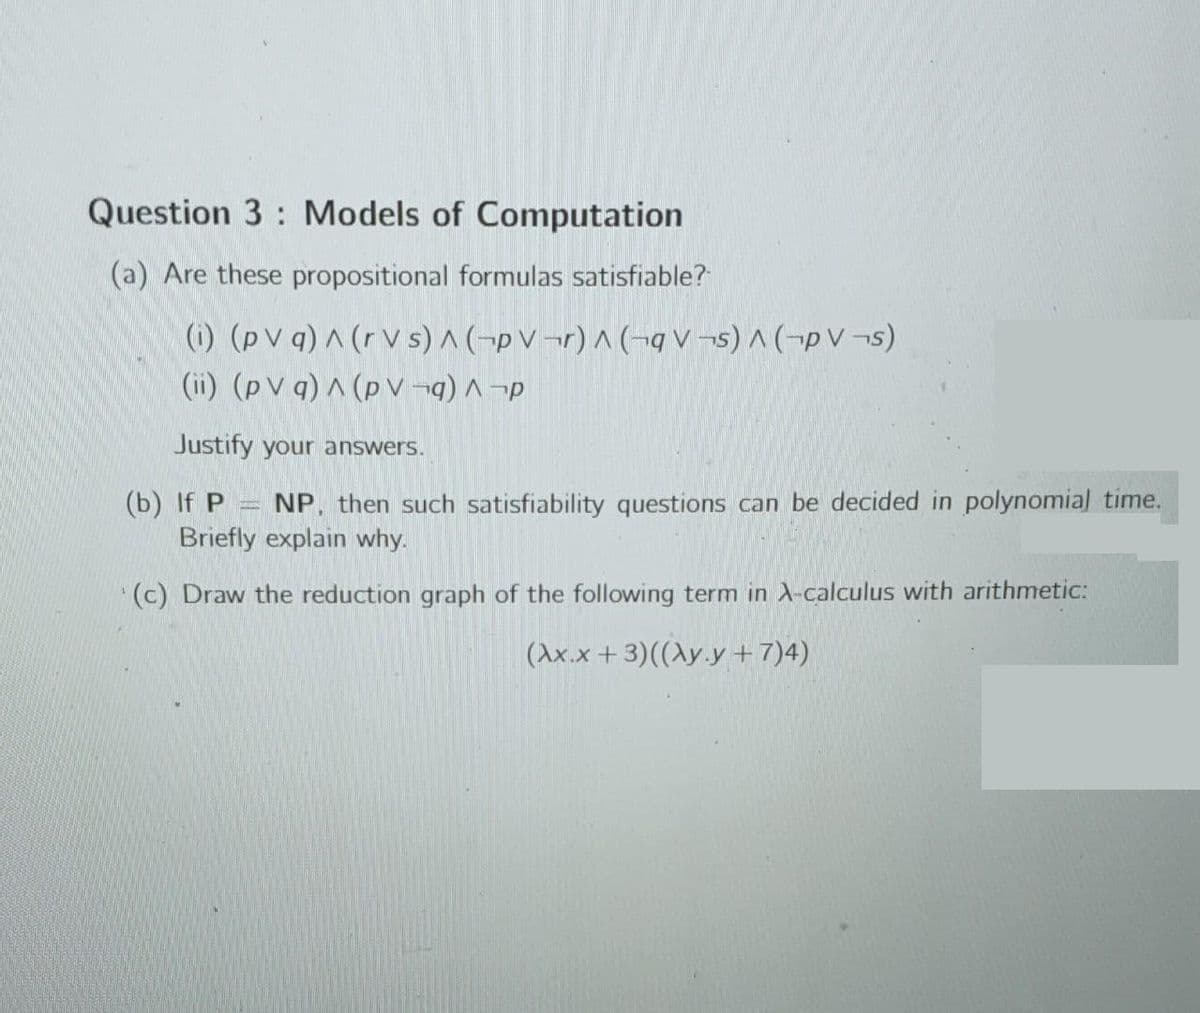 Question 3: Models of Computation
(a) Are these propositional formulas satisfiable?
(i) (pv q) ^ (rvs) A (PV¬r) ^ (qv¬s) ^ (PV¬s)
(ii) (pv q) ^ (pV¬q) ^¬p
Justify your answers.
(b) If P
NP. then such satisfiability questions can be decided in polynomial time.
Briefly explain why.
(c) Draw the reduction graph of the following term in A-calculus with arithmetic:
(Ax.x+3)((Ay.y + 7)4)
ARNING